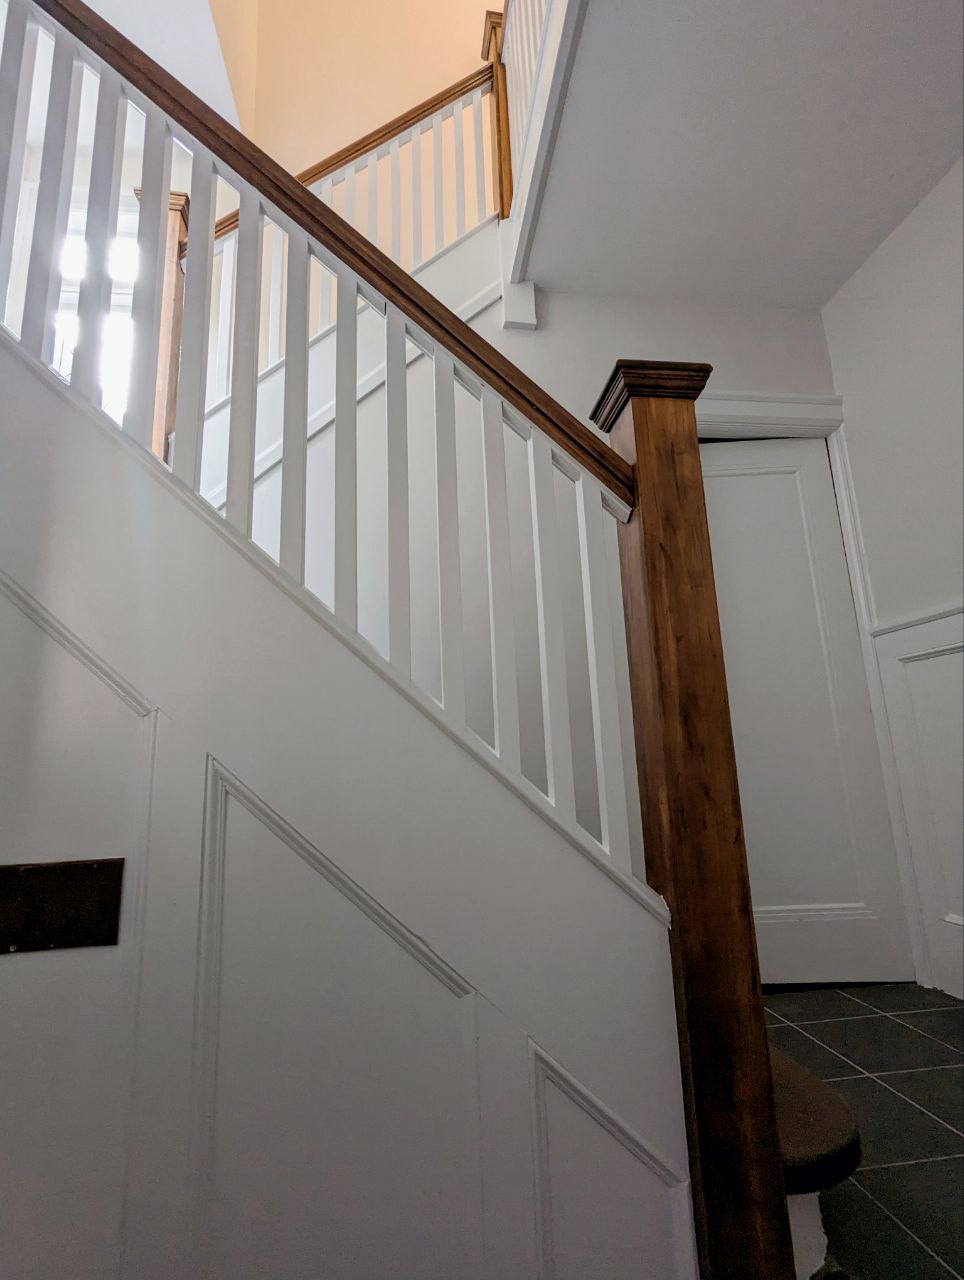 Stairs Refinishing in Bennington Heights. Stairs, wall stringers, risers, handrails, pickets and all associated wooden areas including the landing on the second floor, filedl and caulk all gaps, Striped all varnish and stain, applied 1 coat of stain 2 coats of water base varnish, all areas except stairs and handrails painted white.